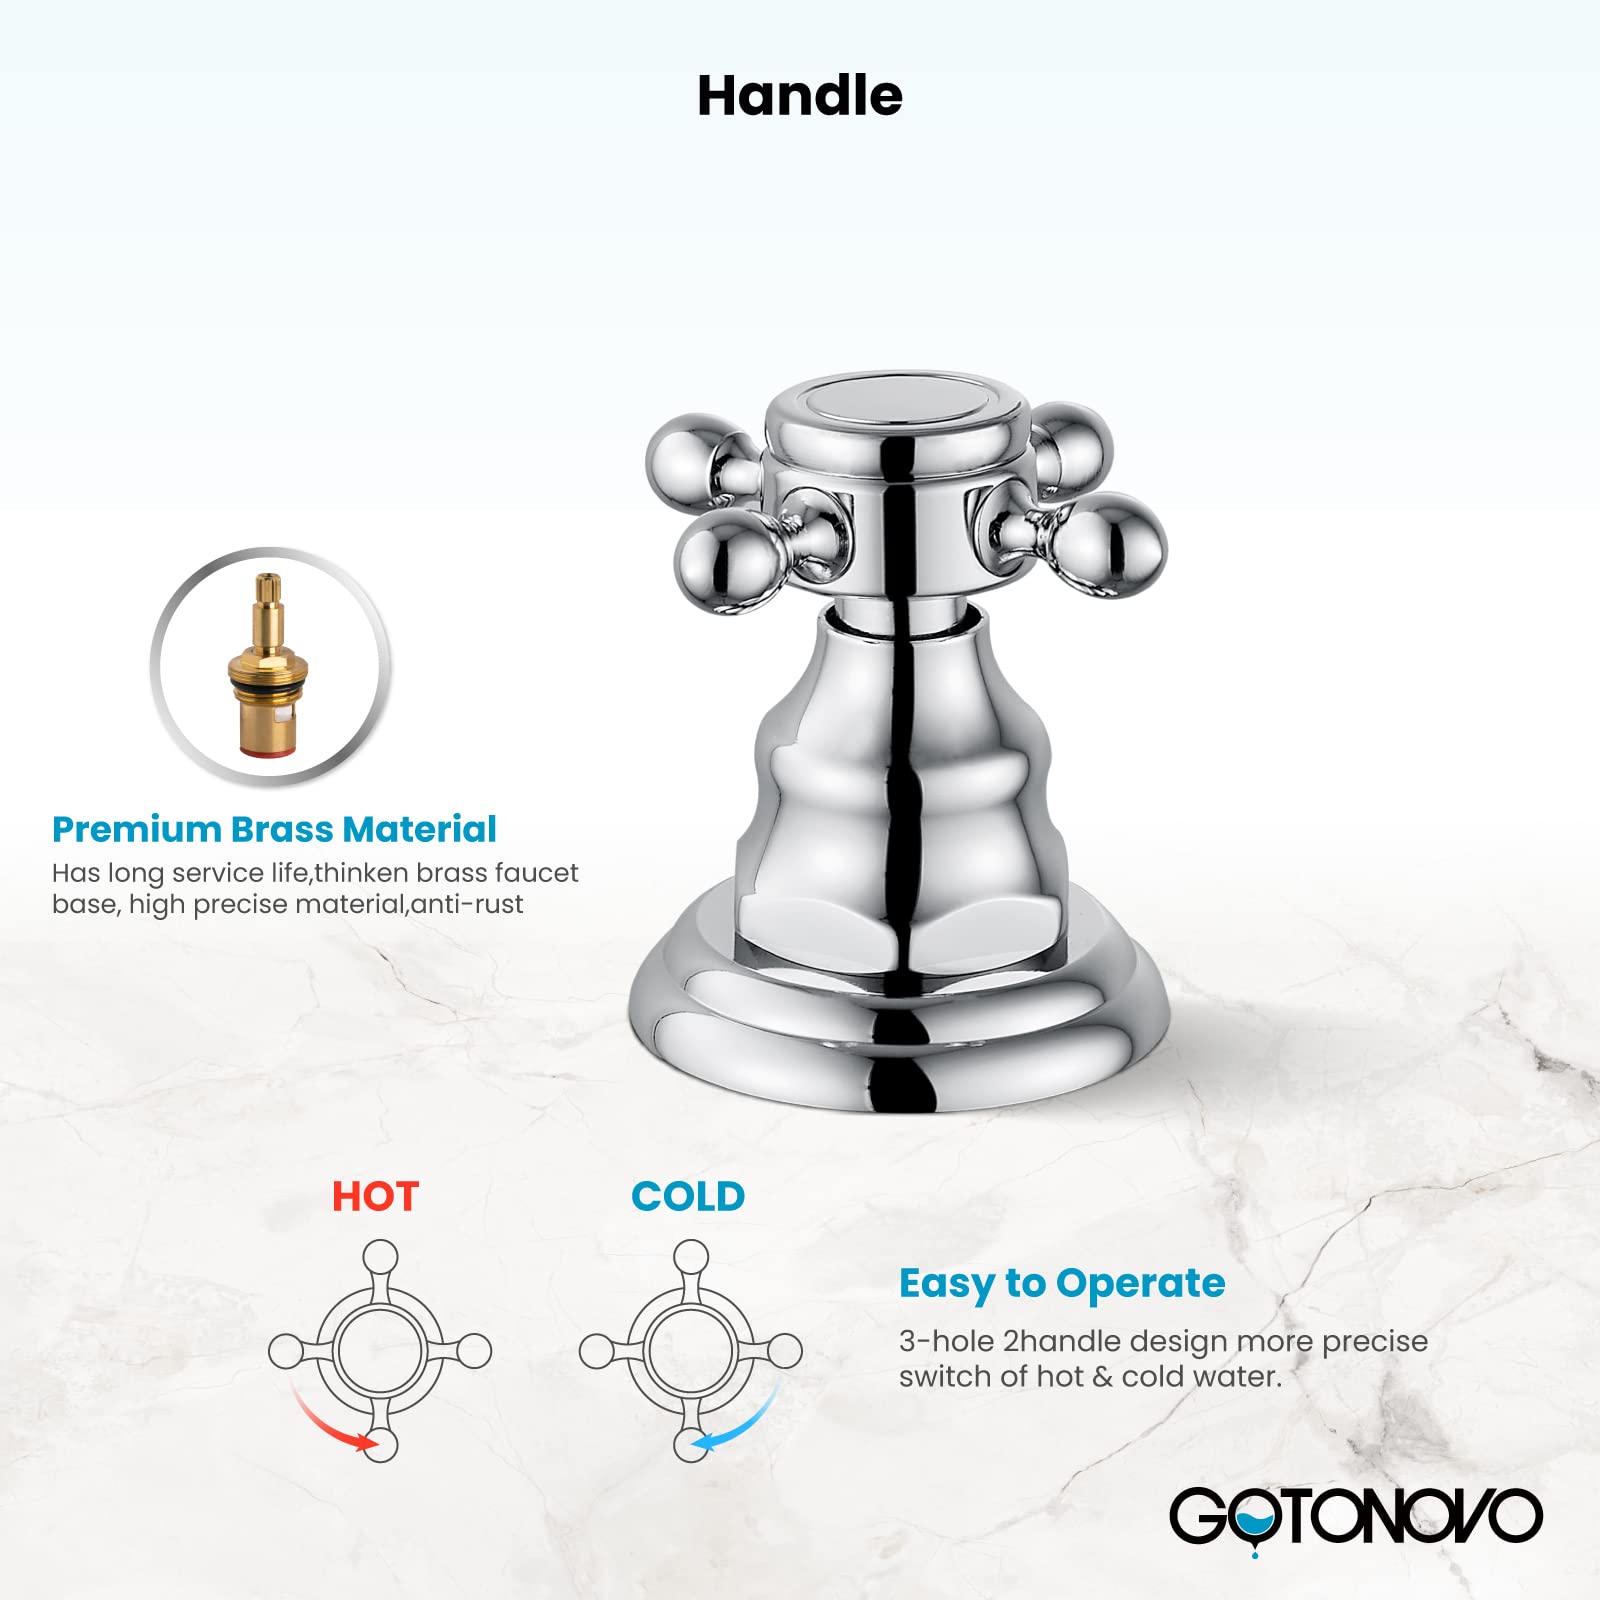 gotonovo 3-Hole Widespread Bathroom Faucet Double Cross Handle Mixer Tap for Bathroom Sink Deck Mount Hot Cold Water Matching Pop Up Drain with Overflow Polished Chrome Victorian Spout